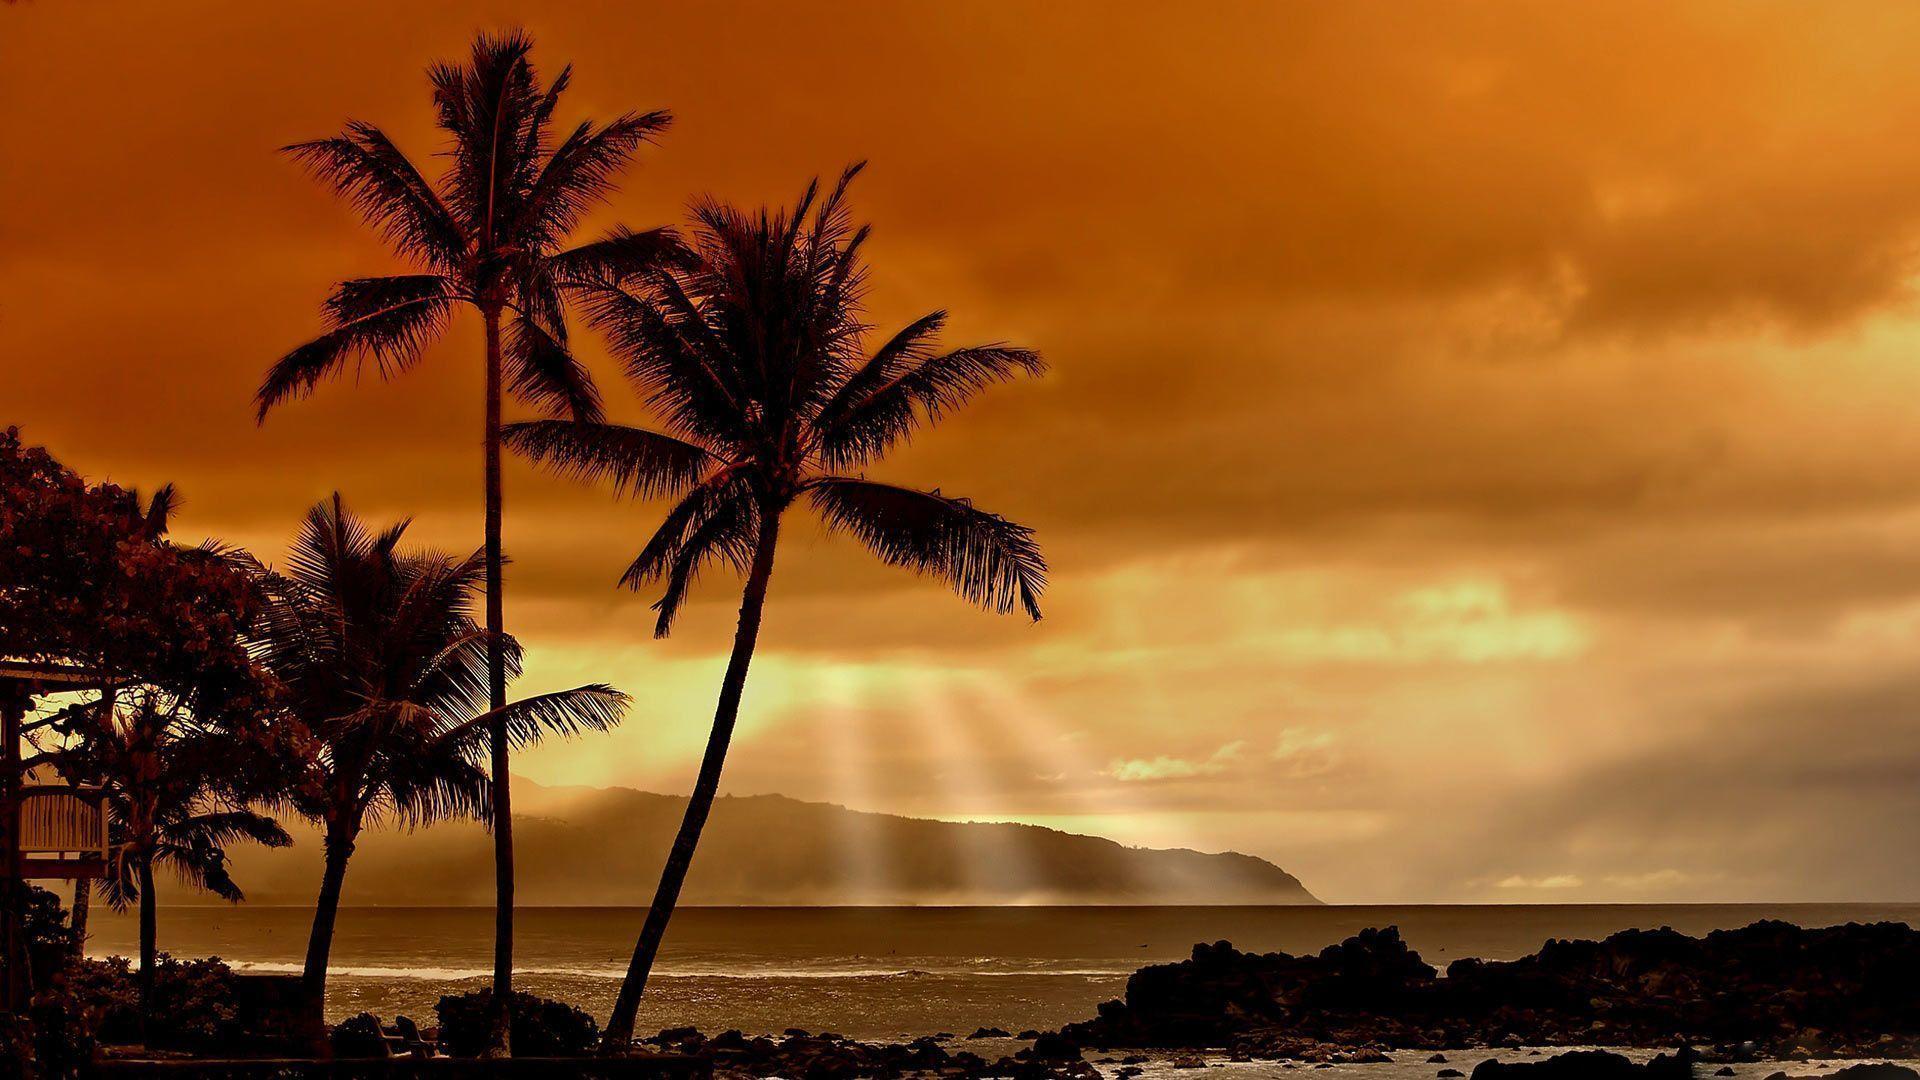 HD hawaii sunset picture / Wallpaper Database